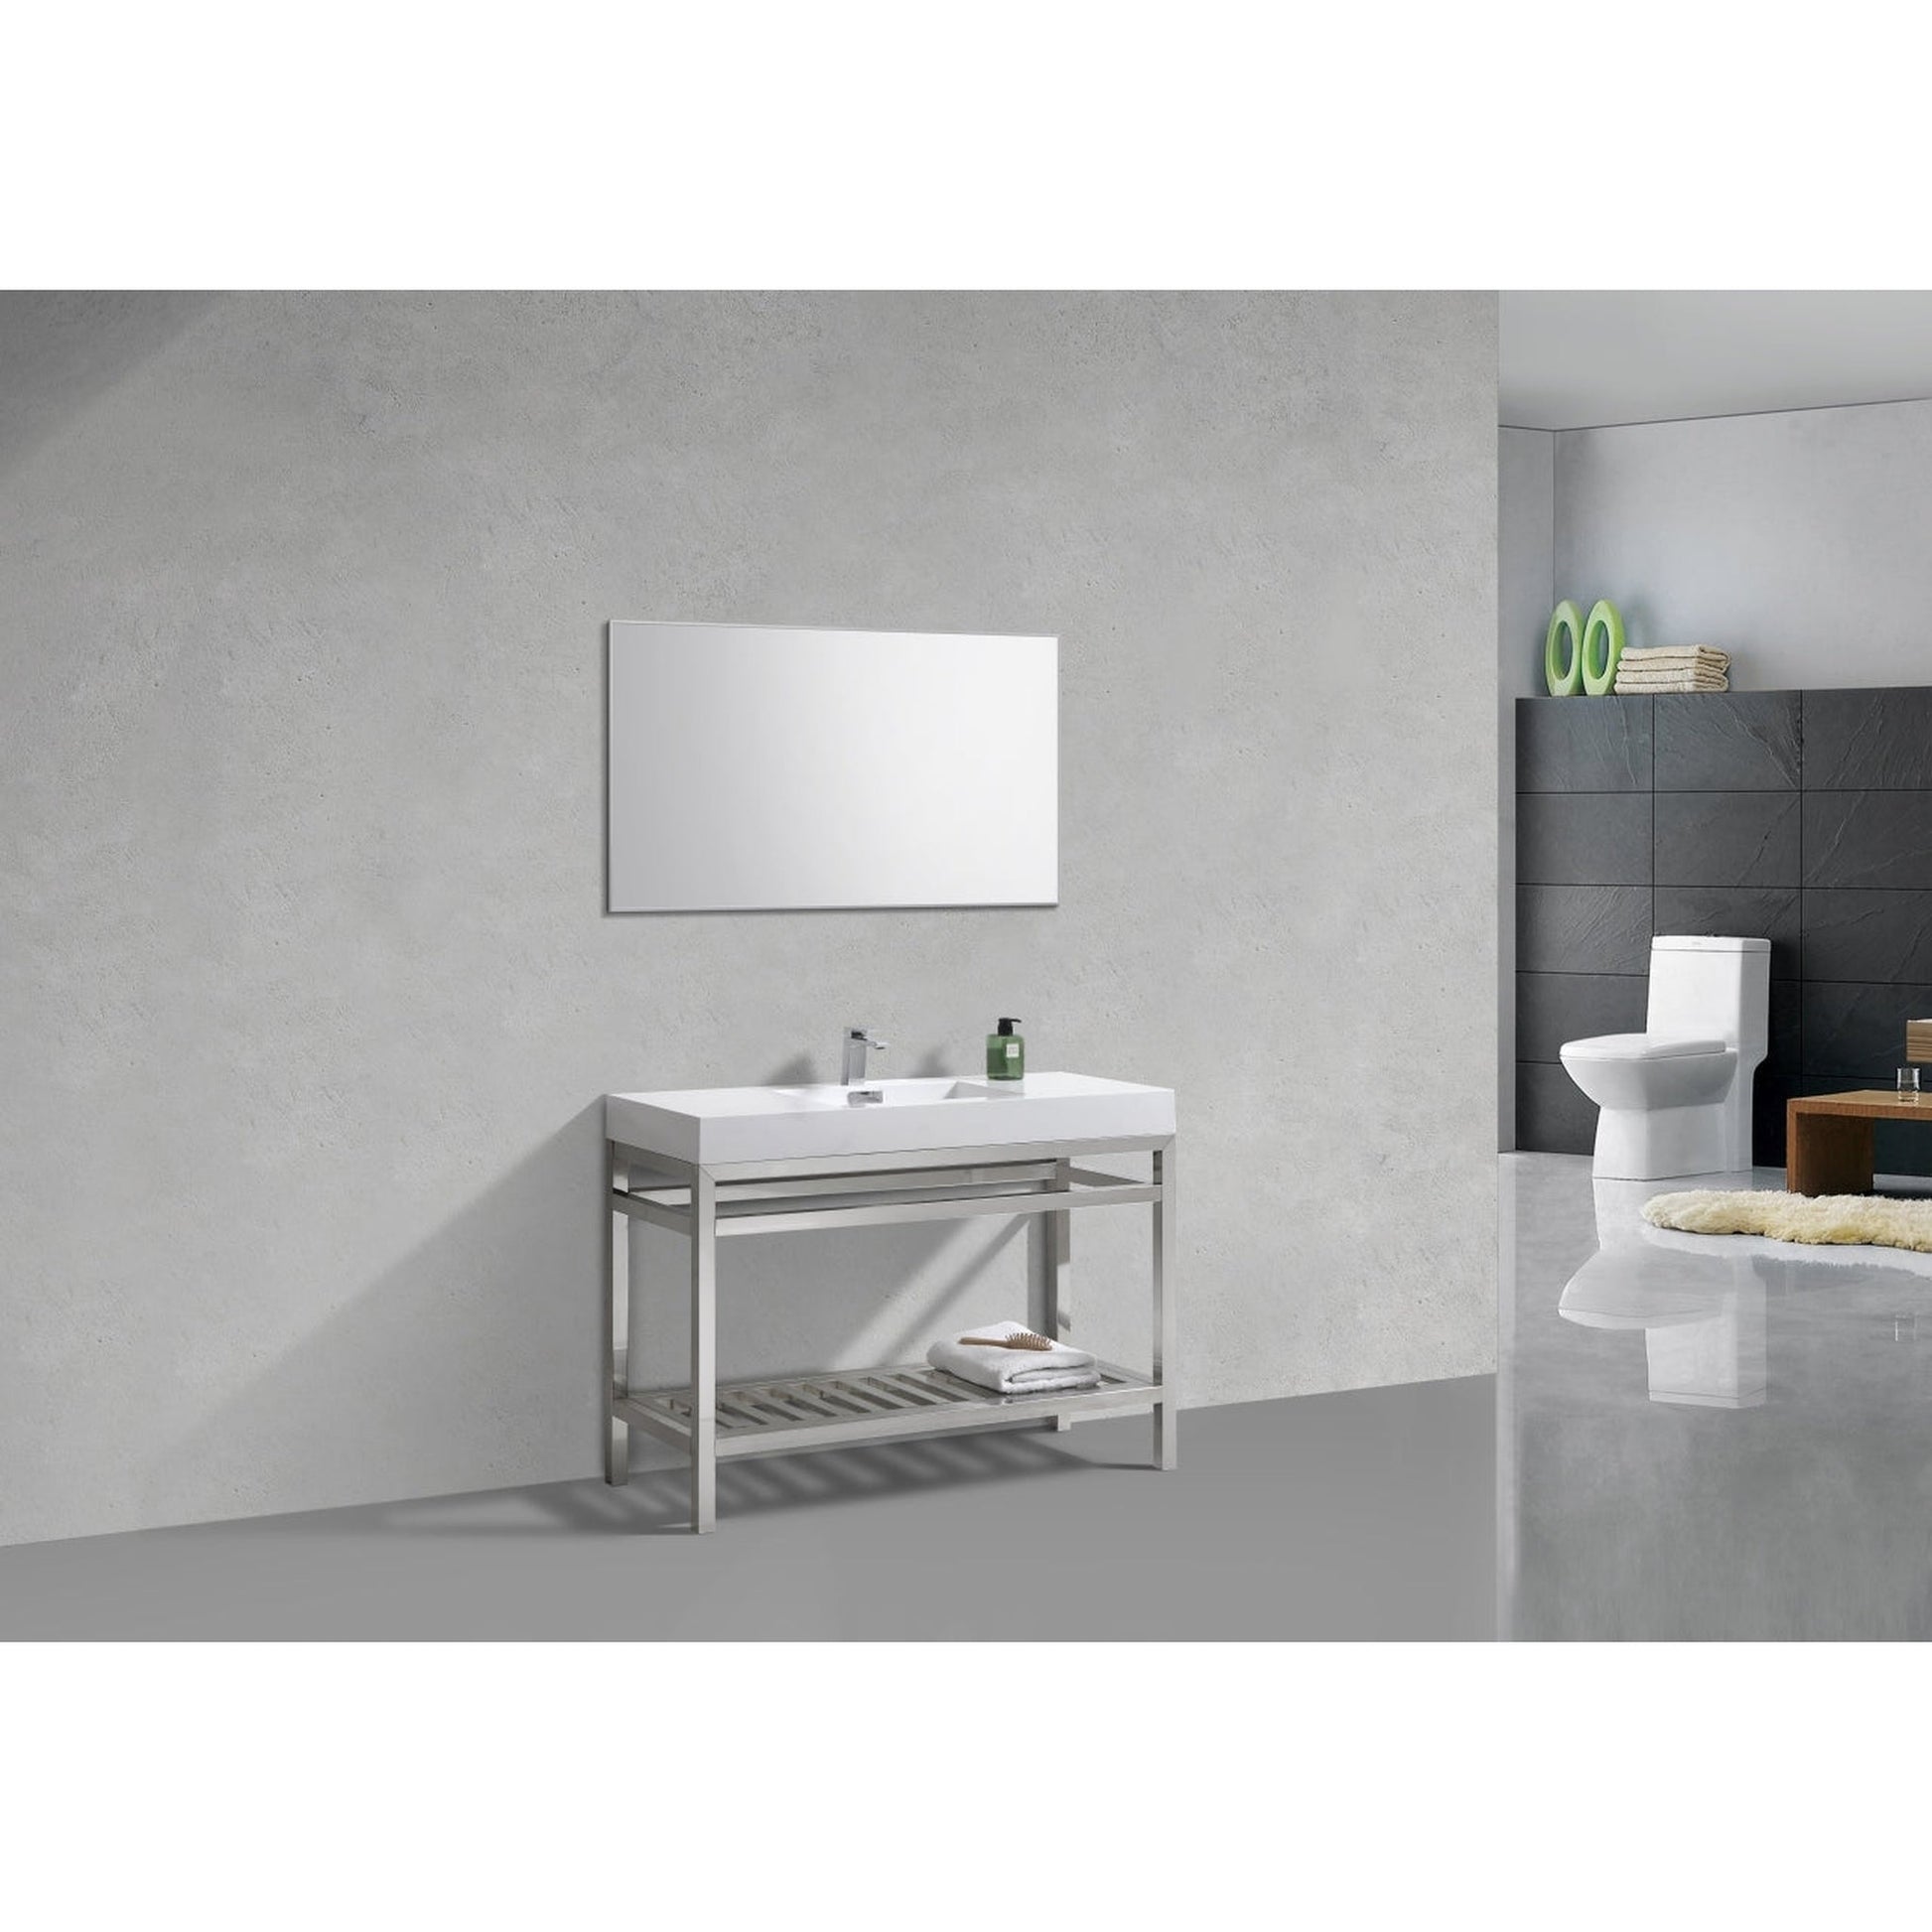 KubeBath Cisco 48" Stainless Steel Chrome Console Freestanding Modern Bathroom Vanity With Single Integrated Acrylic Sink With Overflow